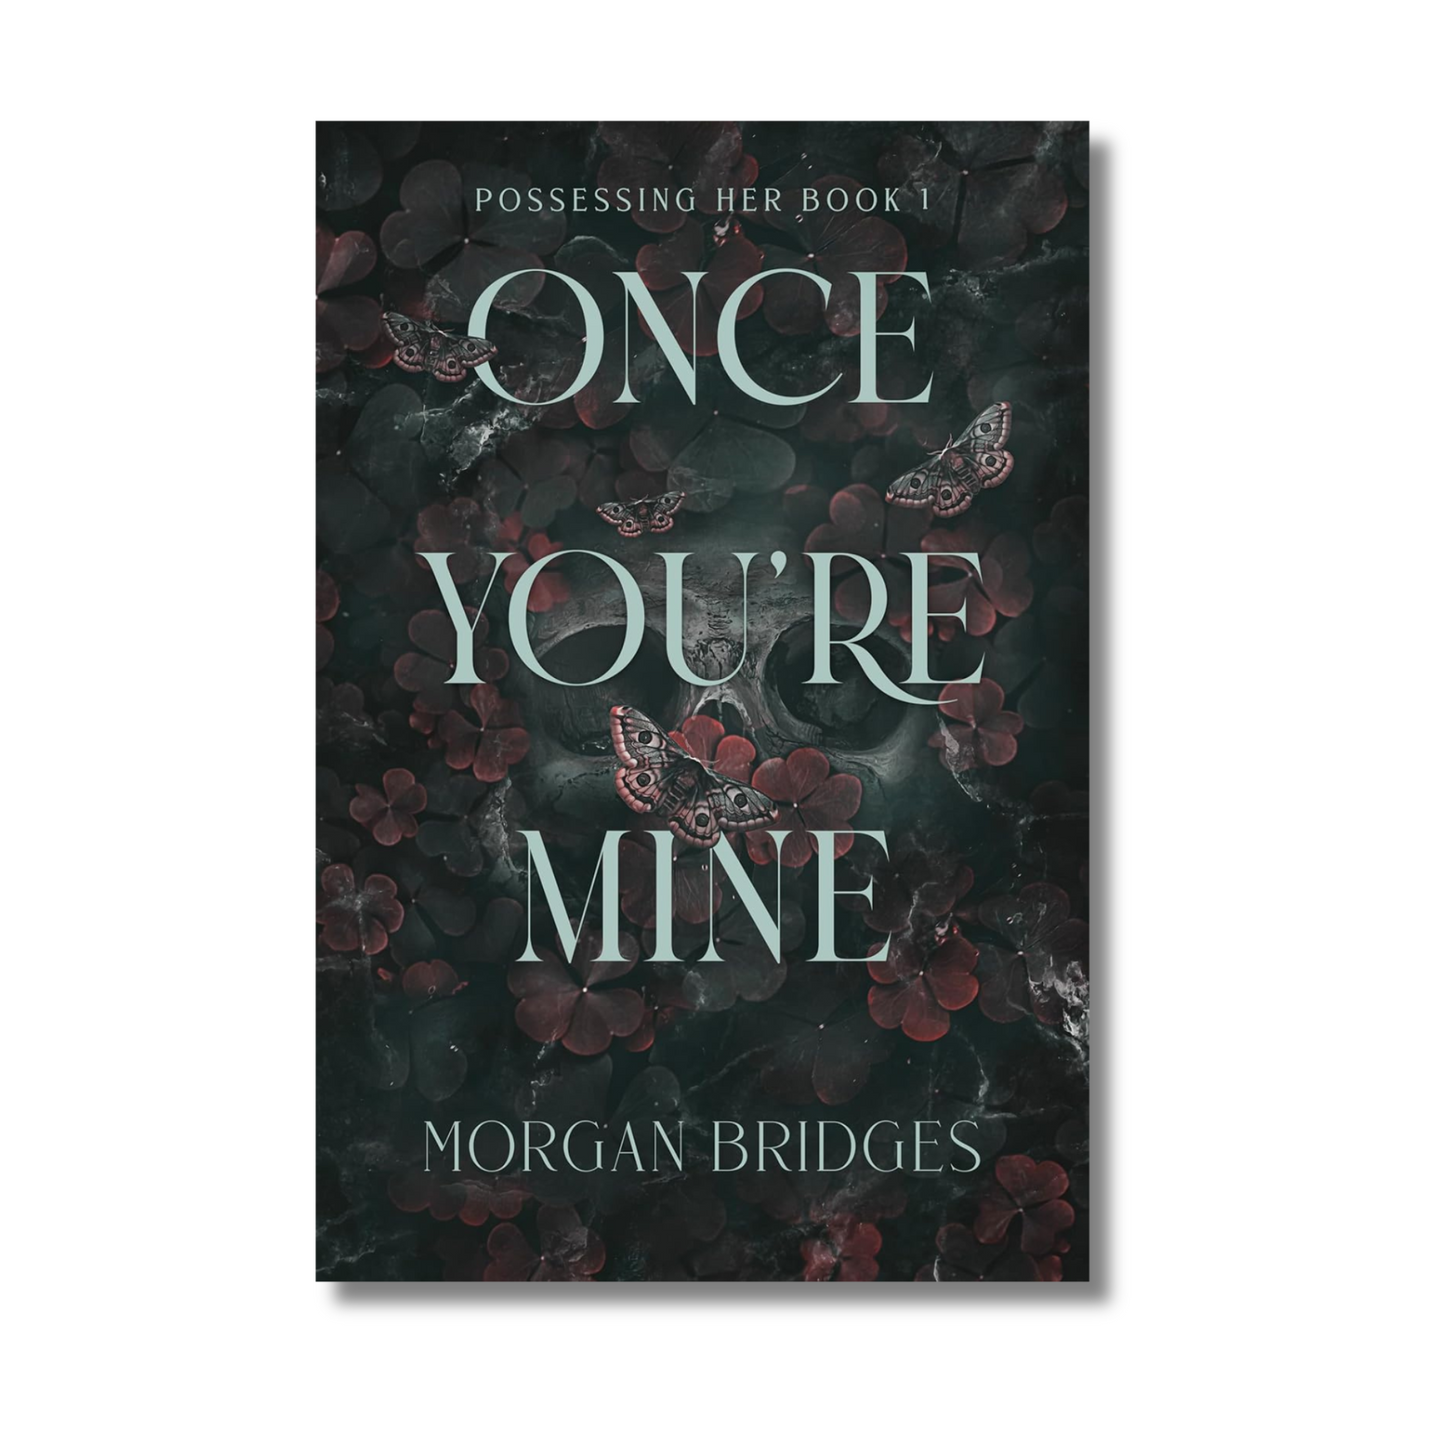 Once You’re Mine by Morgan Bridges (Paperback)